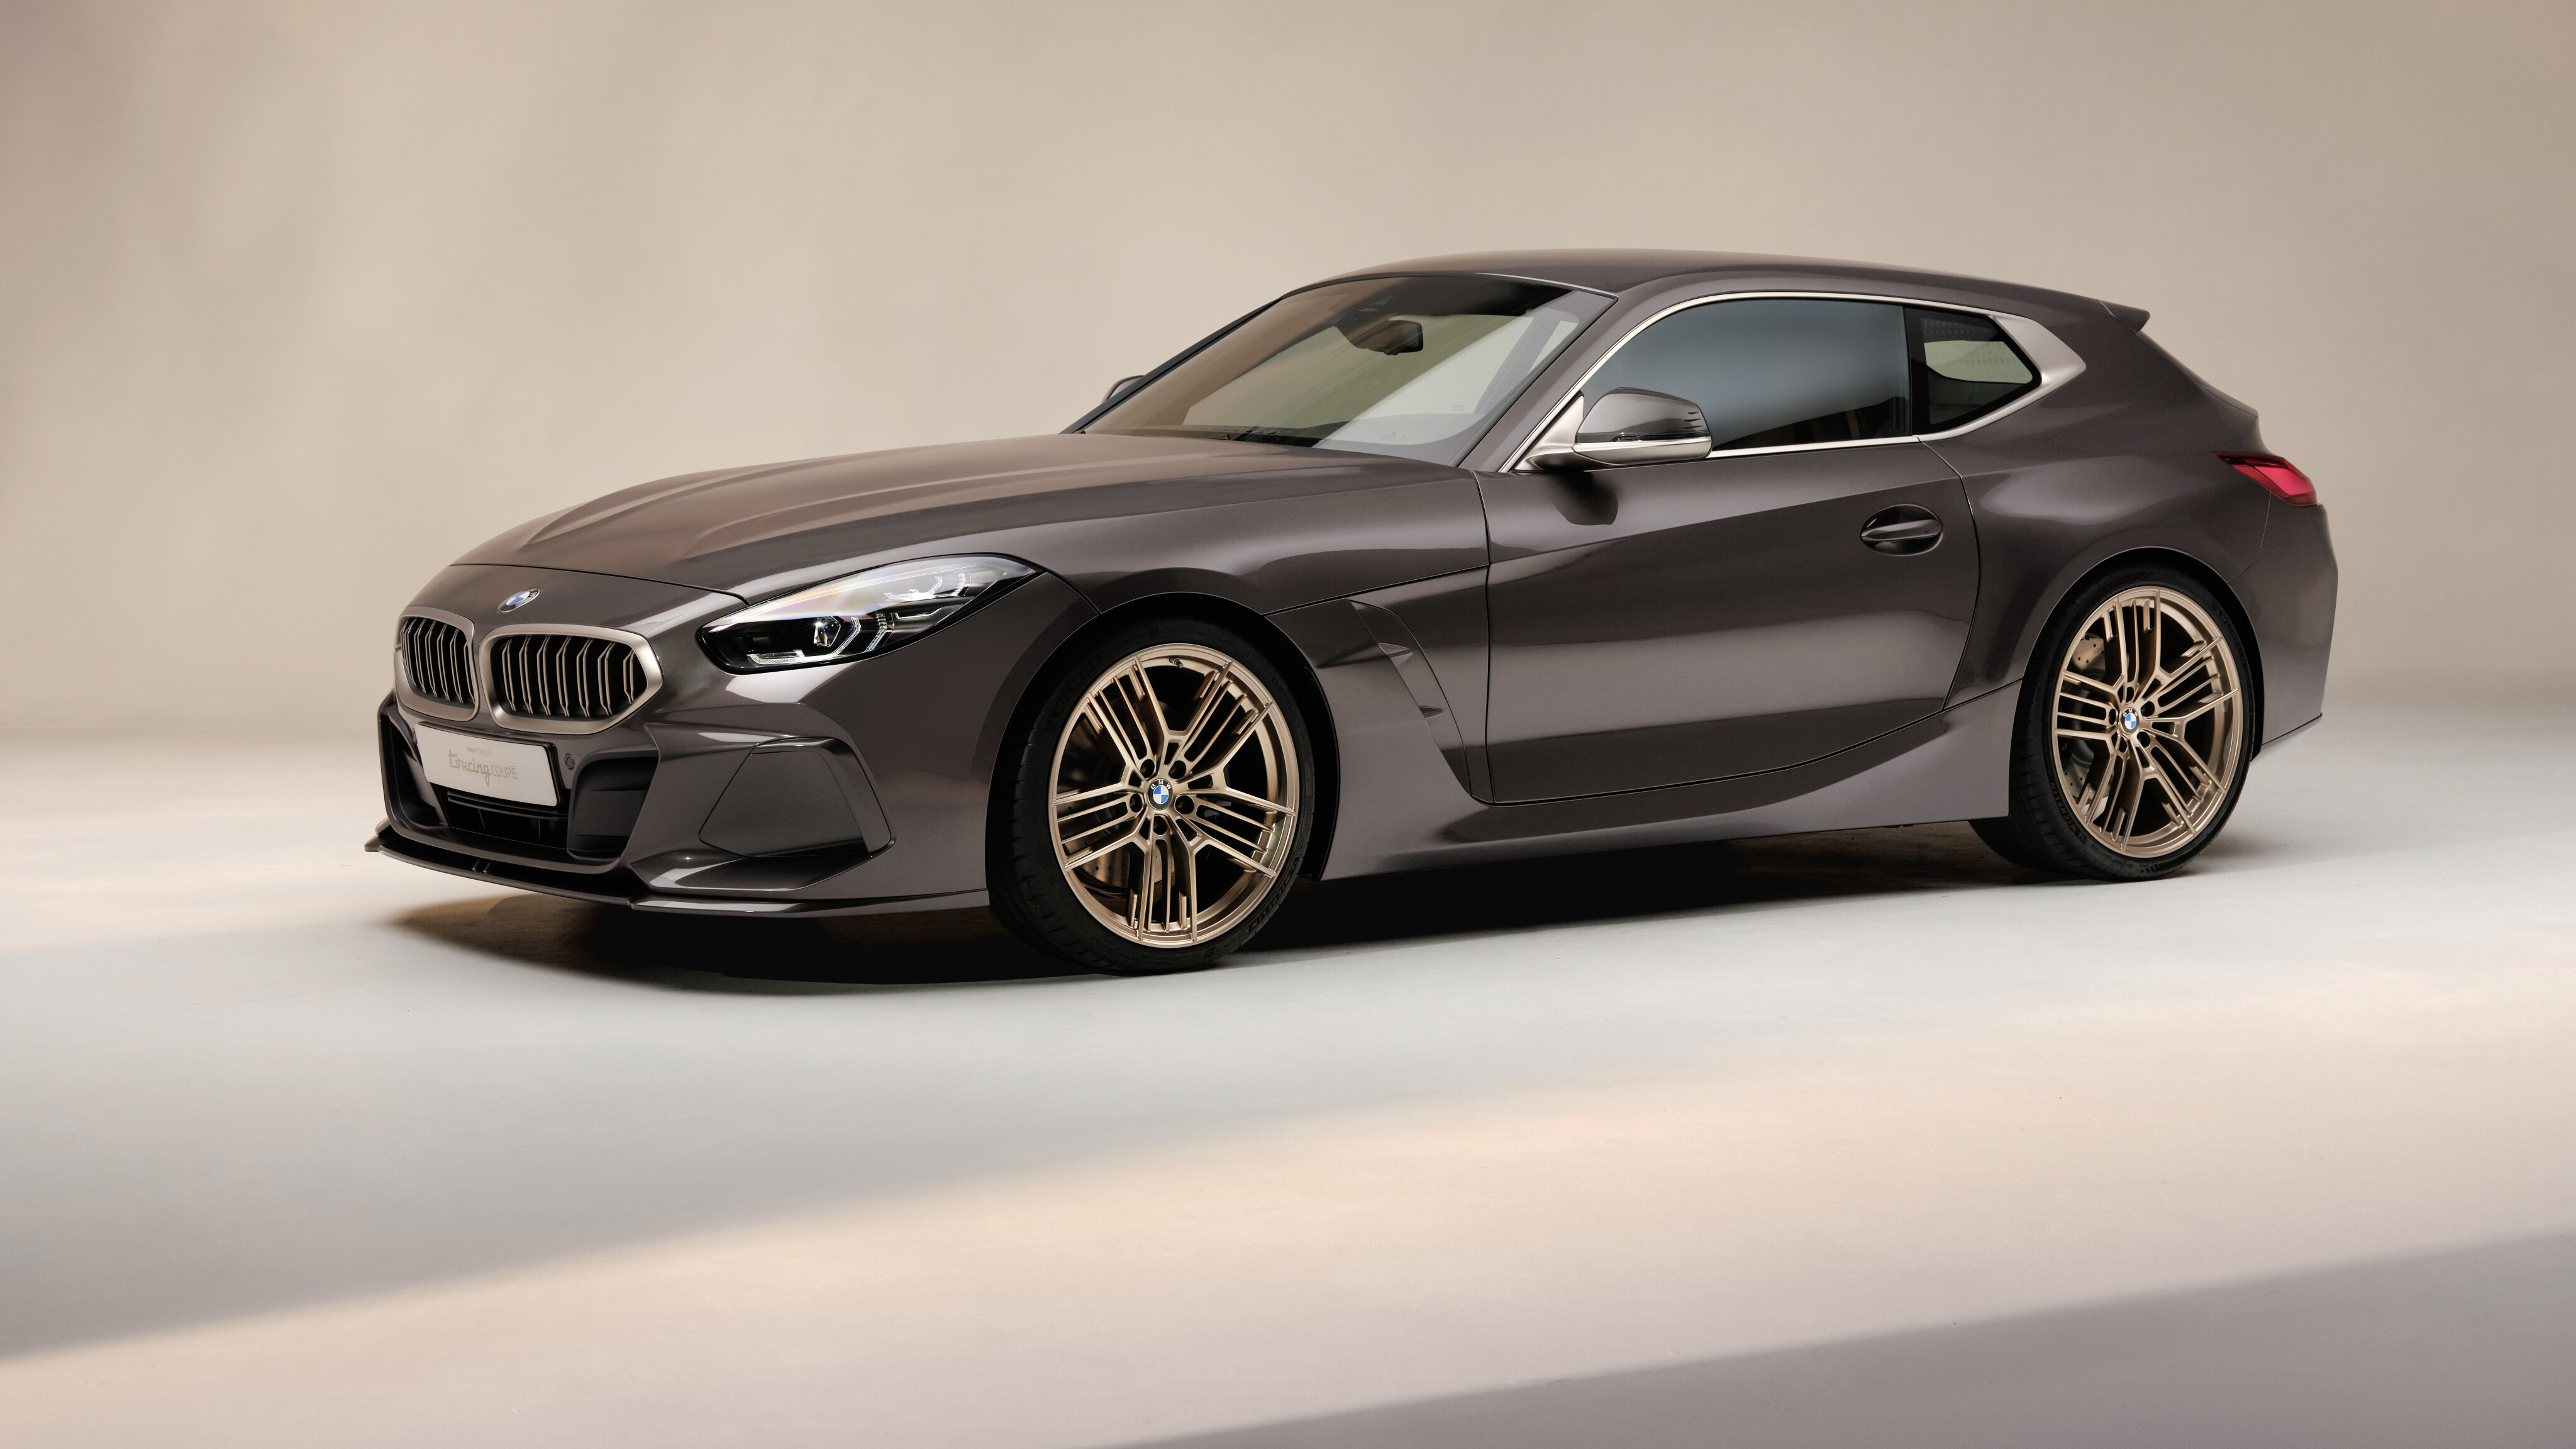 BMW Z4 Coupe concept unveiled, looks even better than ours